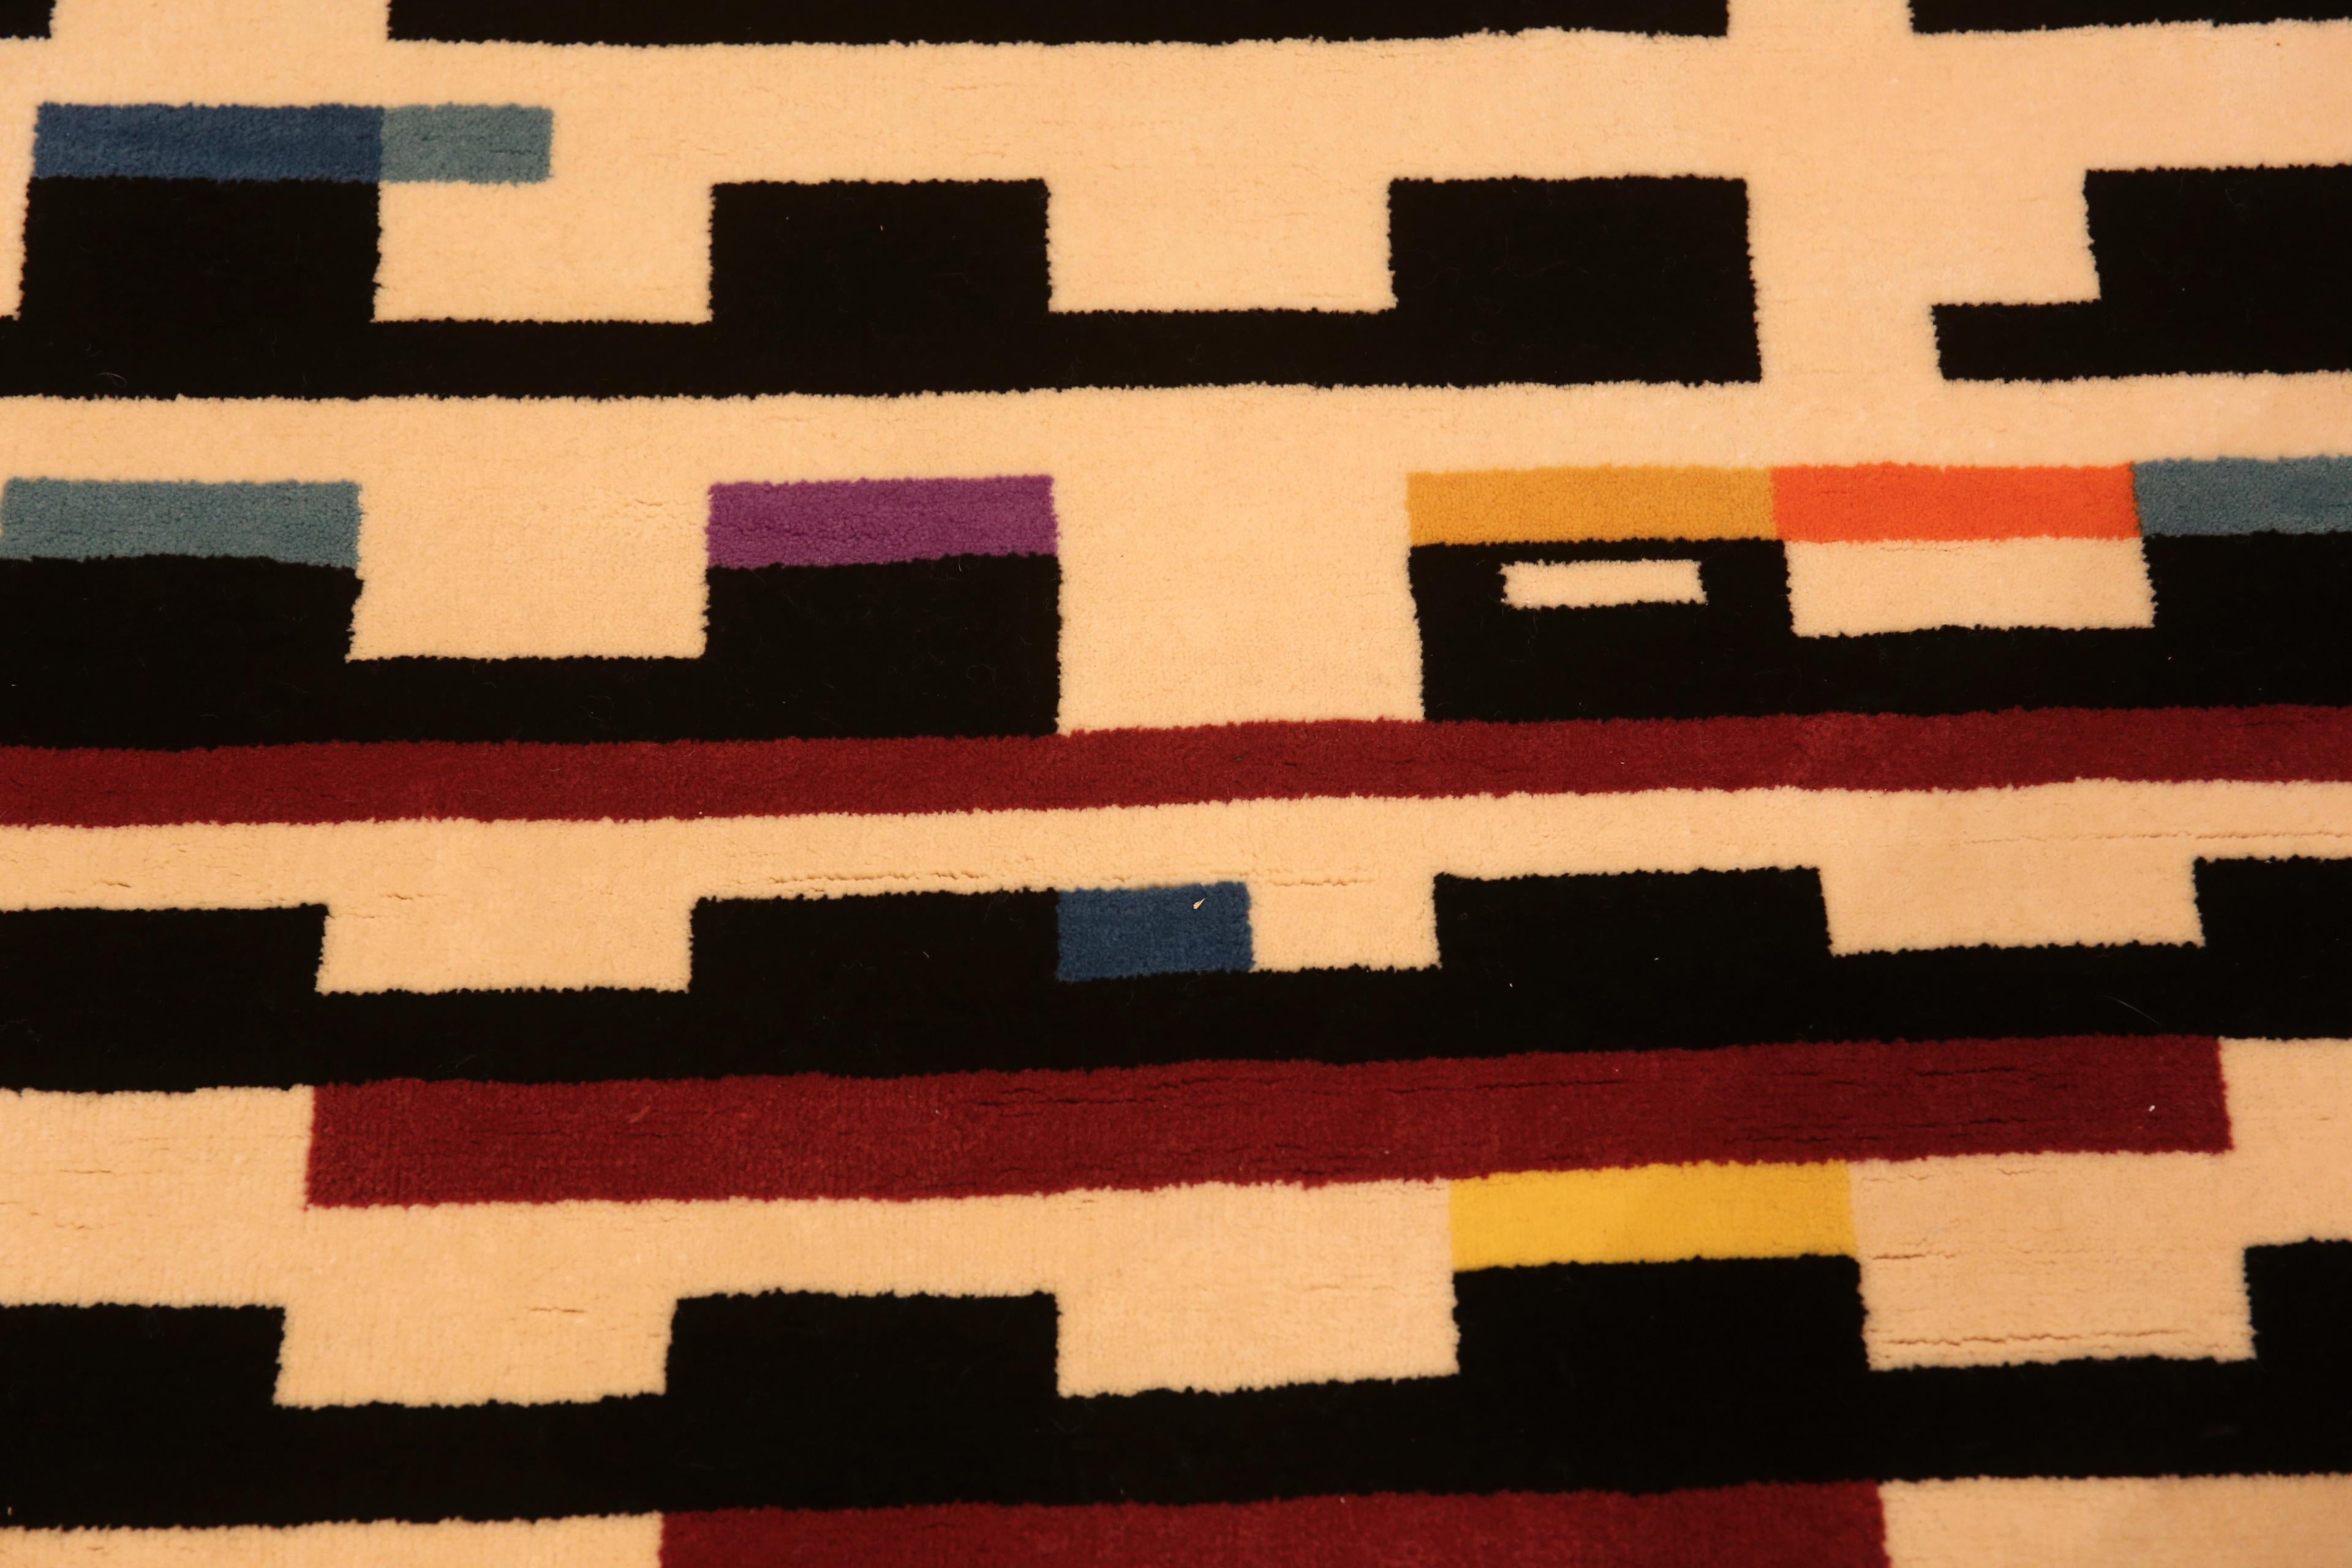 20th Century Vintage Israeli Rug By Yaacov Agam. 5 ft 11 in x 7 ft 3 in For Sale